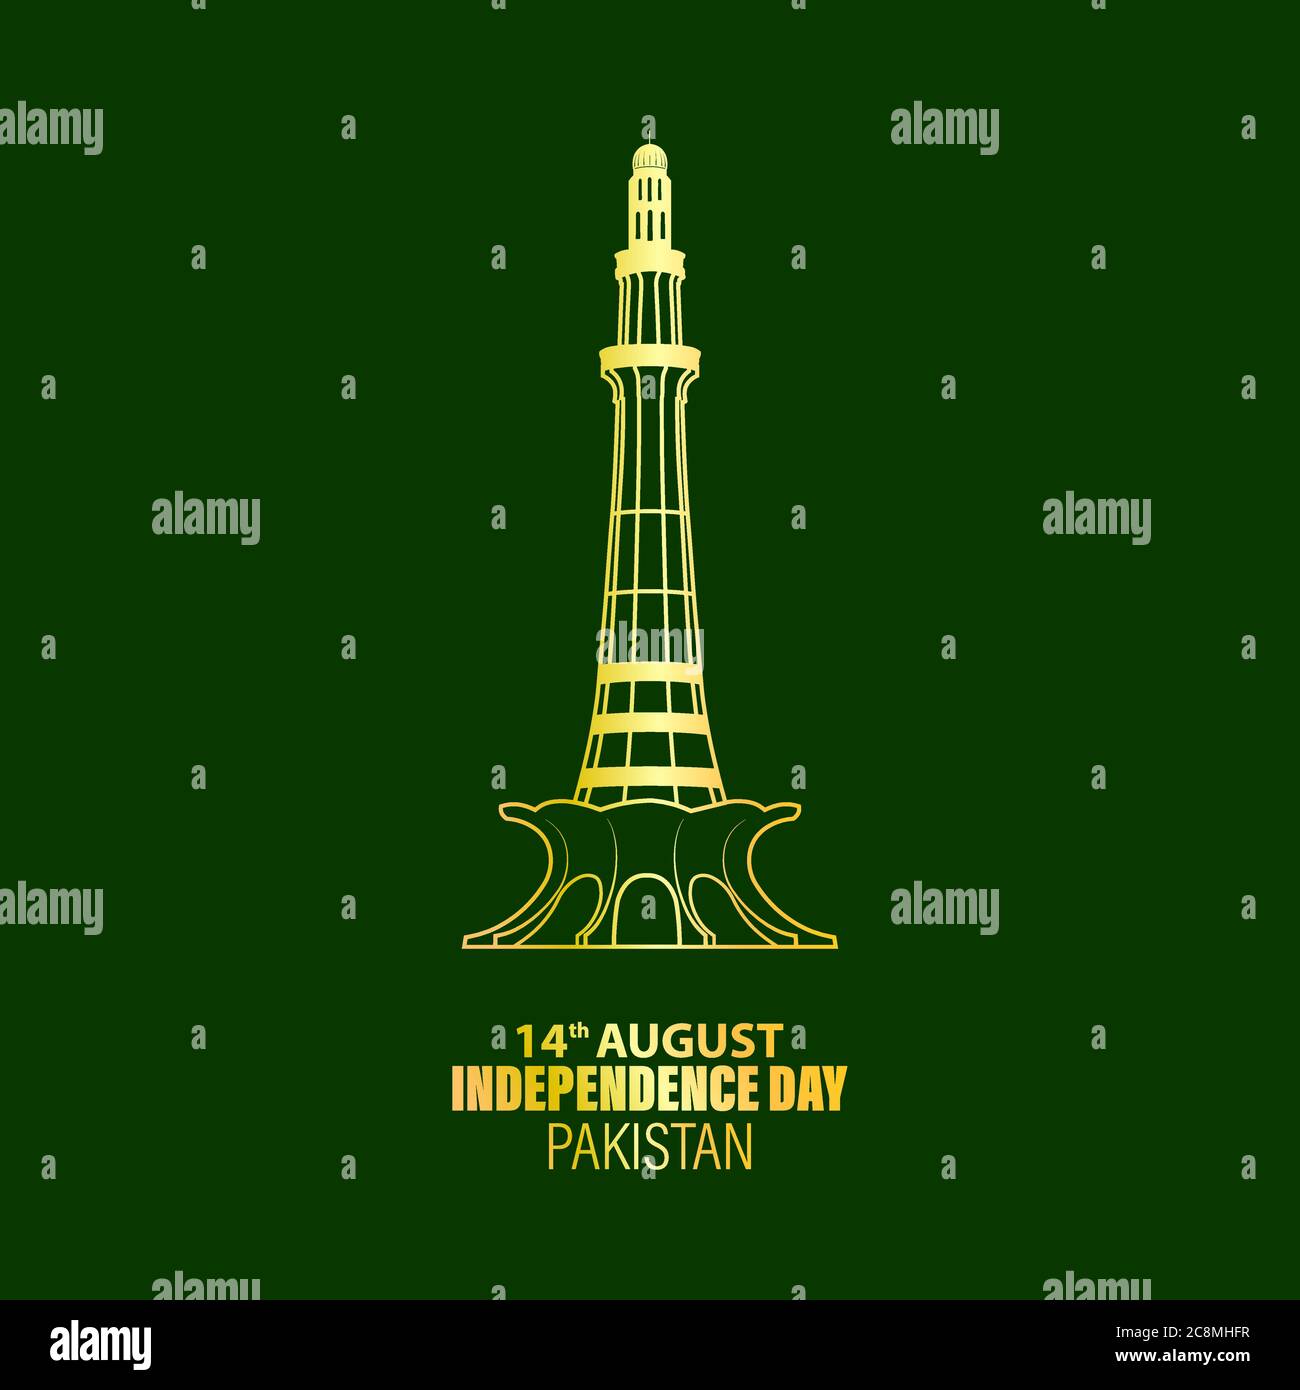 Vector Illustration of Pakistan Independence Day 14th August. Minar e Pakistan a famous historical minaret abstract Stock Vector